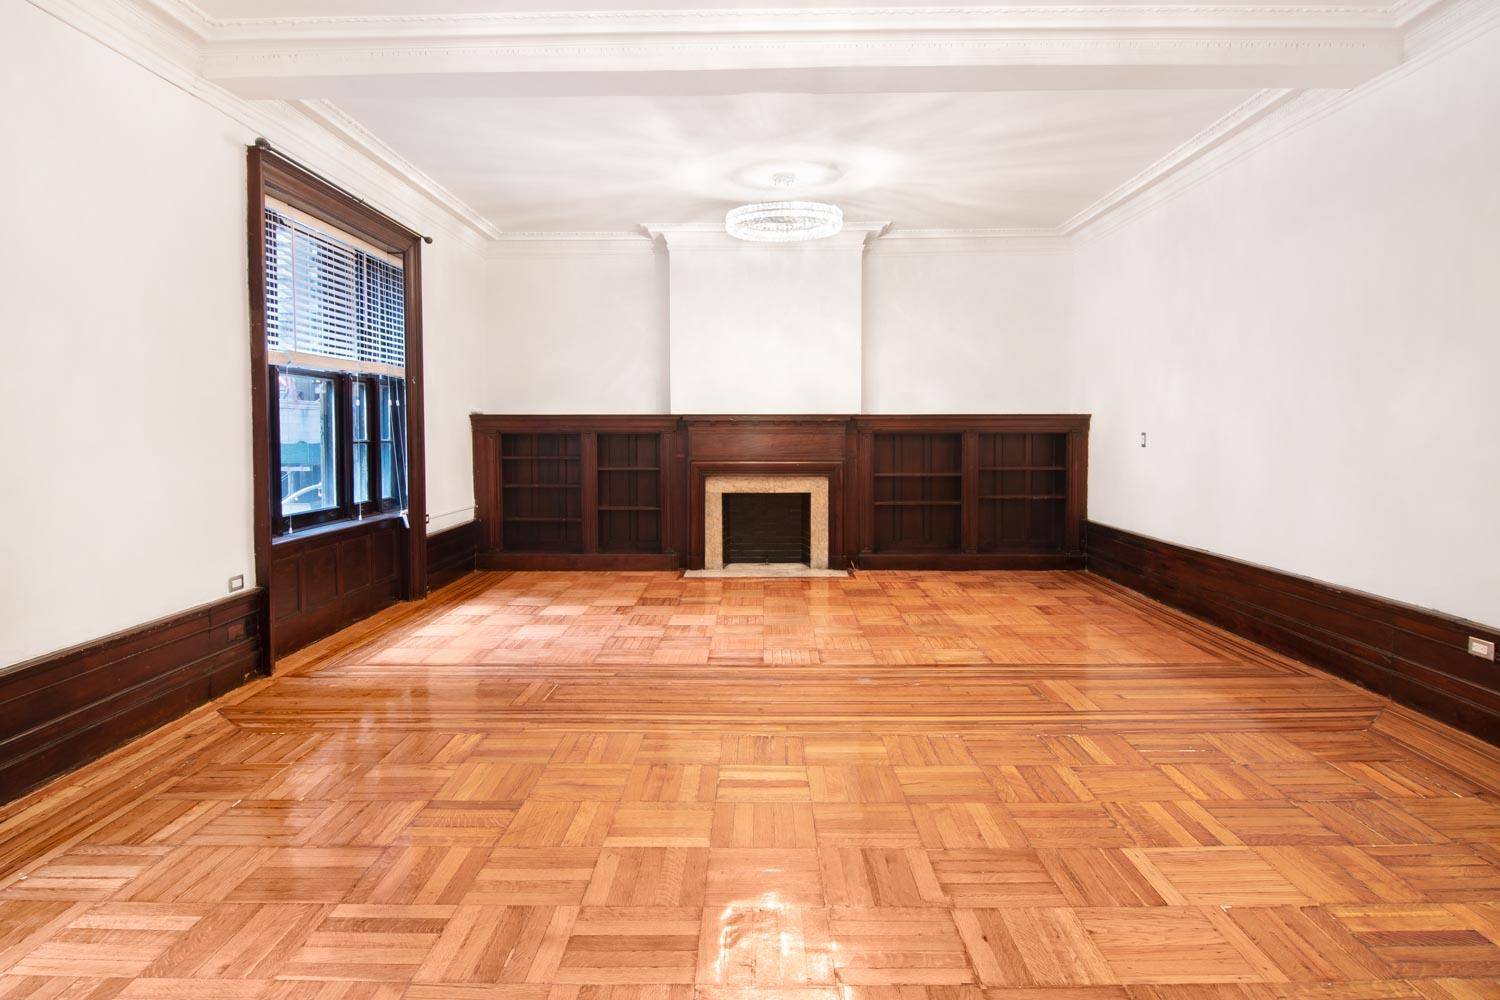 No Fee, Huge 4 Bed / 2.5 Bath in Historic Midtown Building, W/D in unit